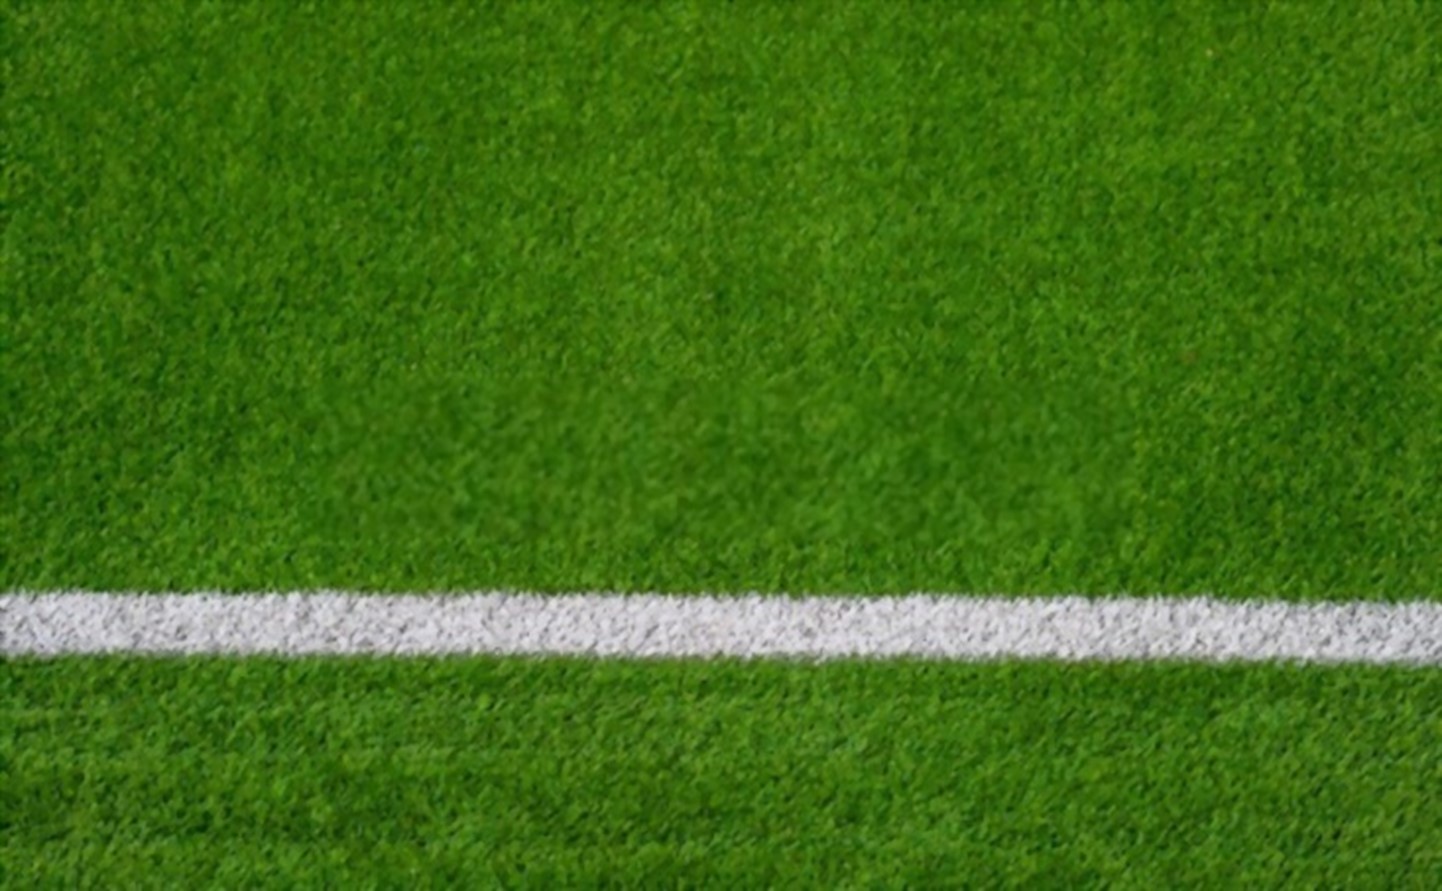 Types of Sports Flooring Surfaces